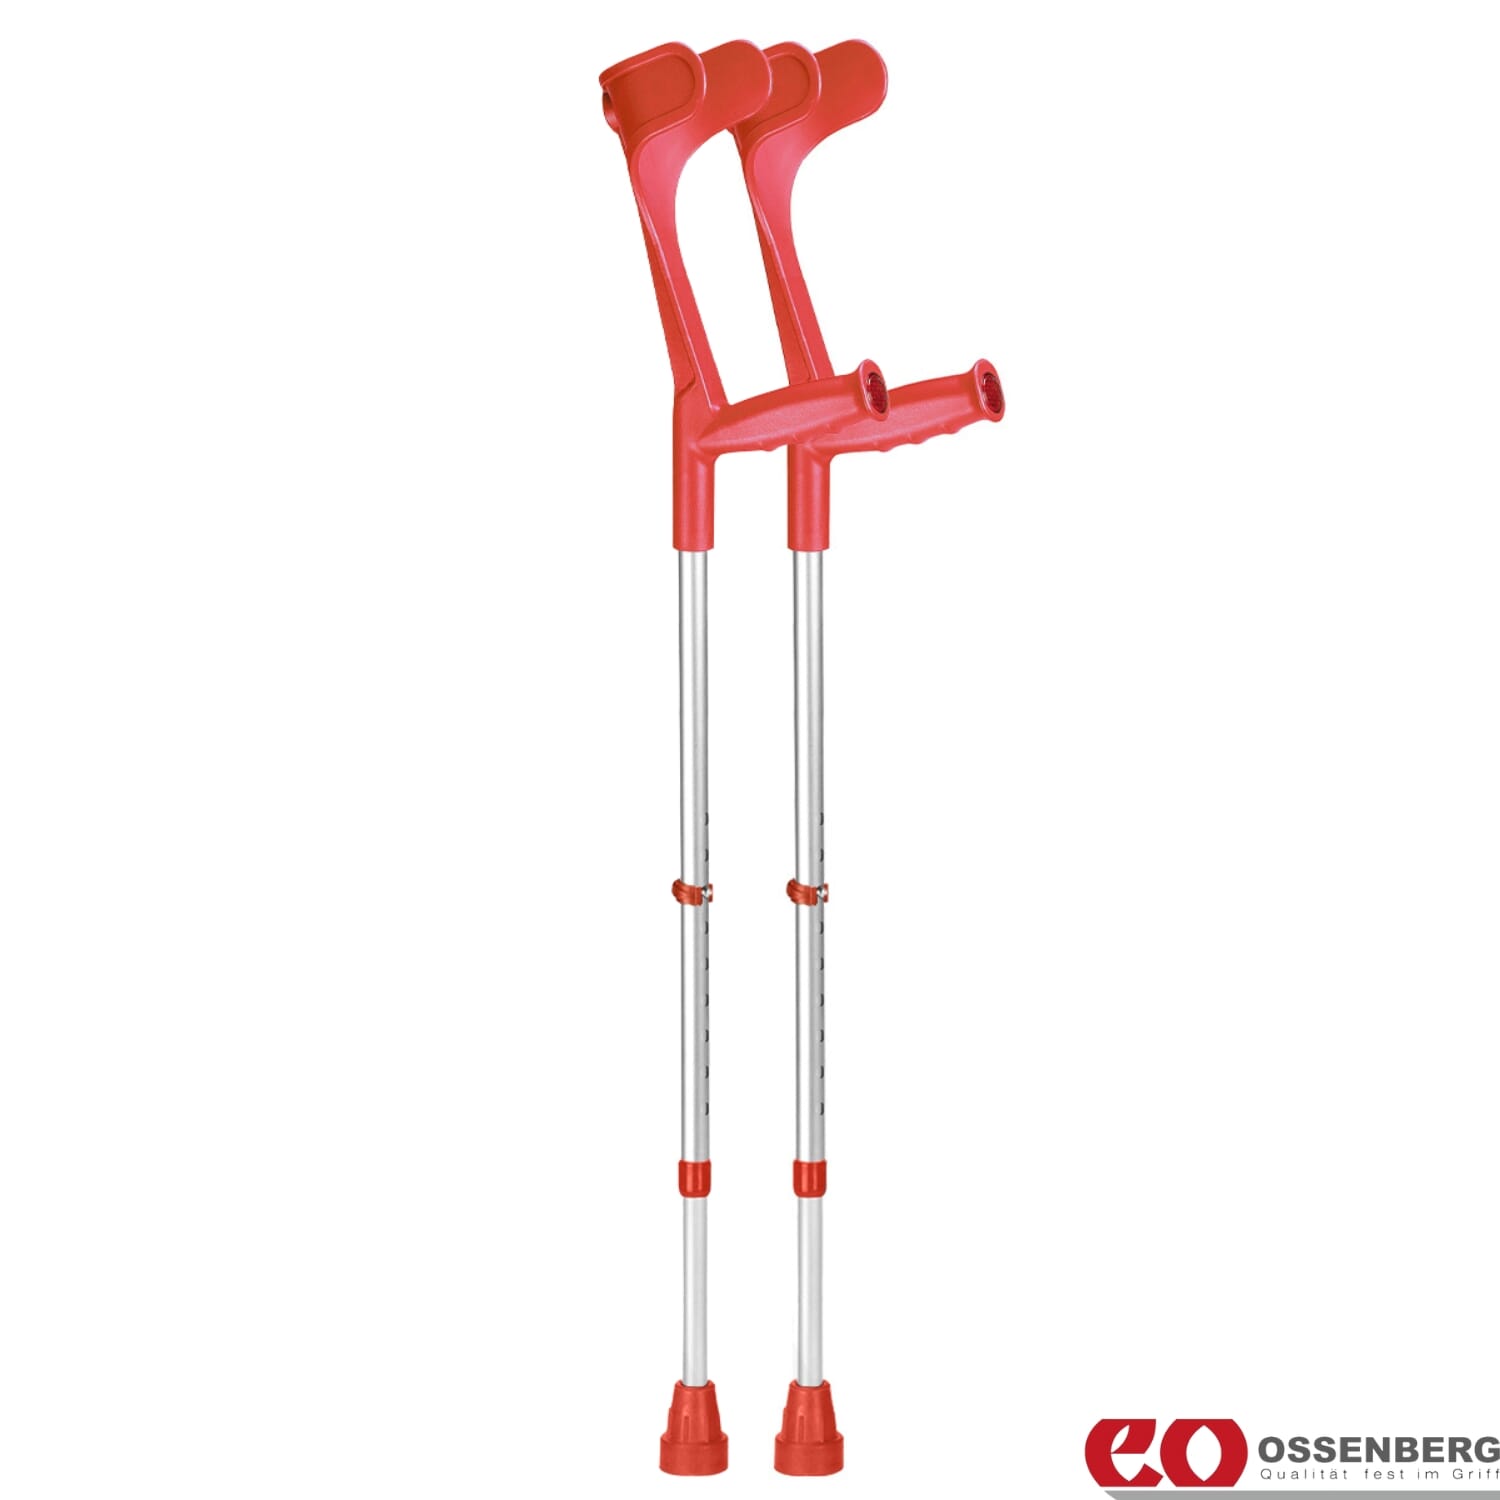 View Ossenberg Open Cuff Crutches Red Pair information